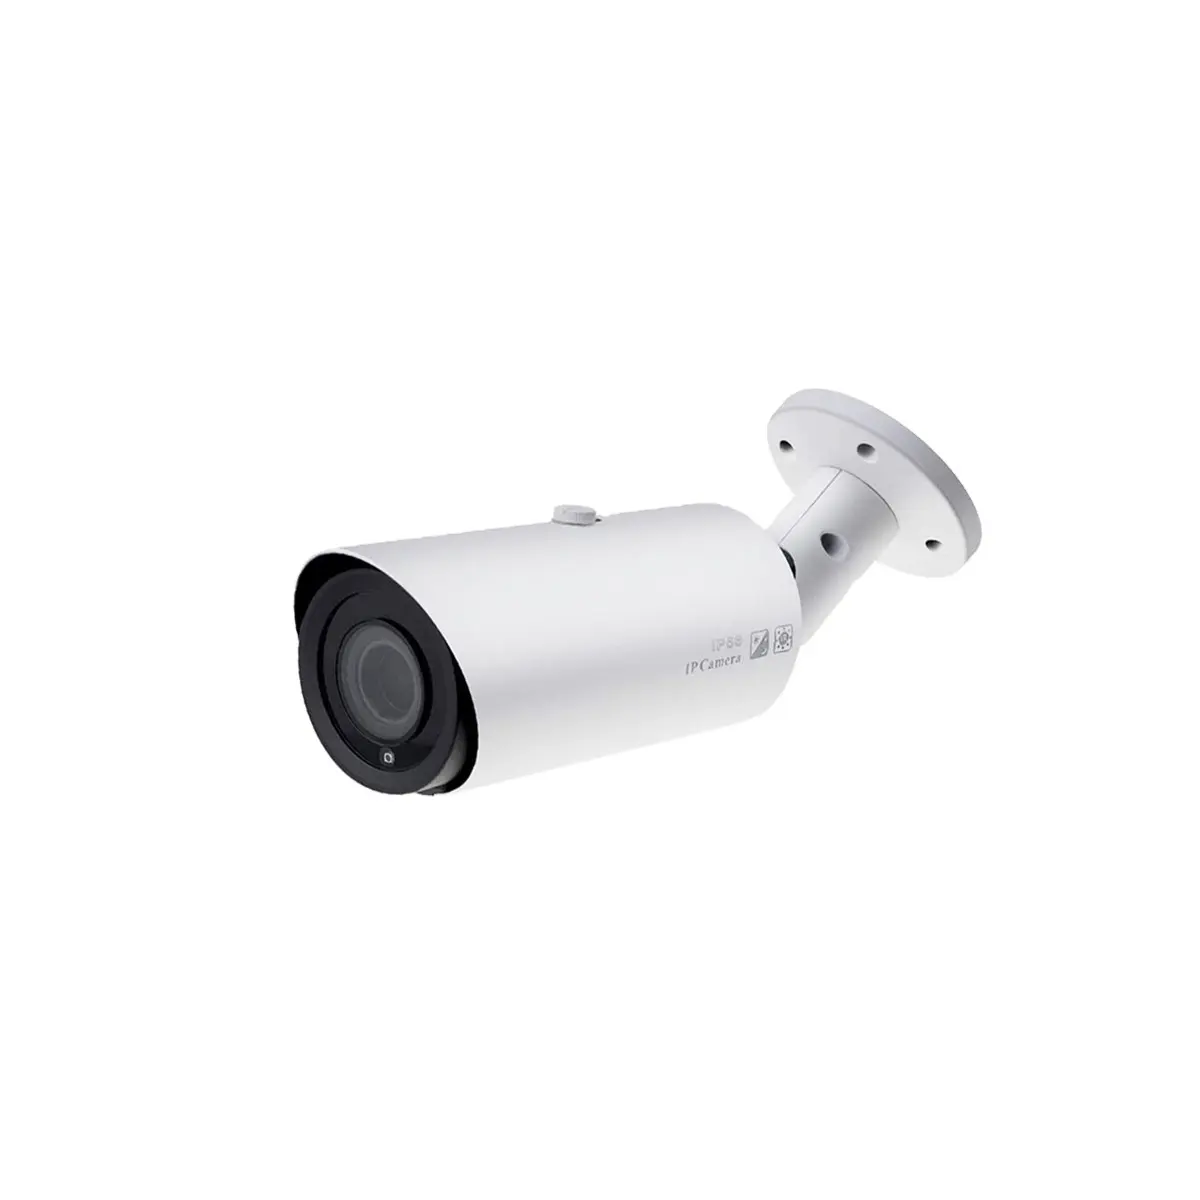 12MP POE IP Camera 30fps Real time With Motorized Lens Human&Vehicle detection Waterproof Outdoor With audio& SD slot